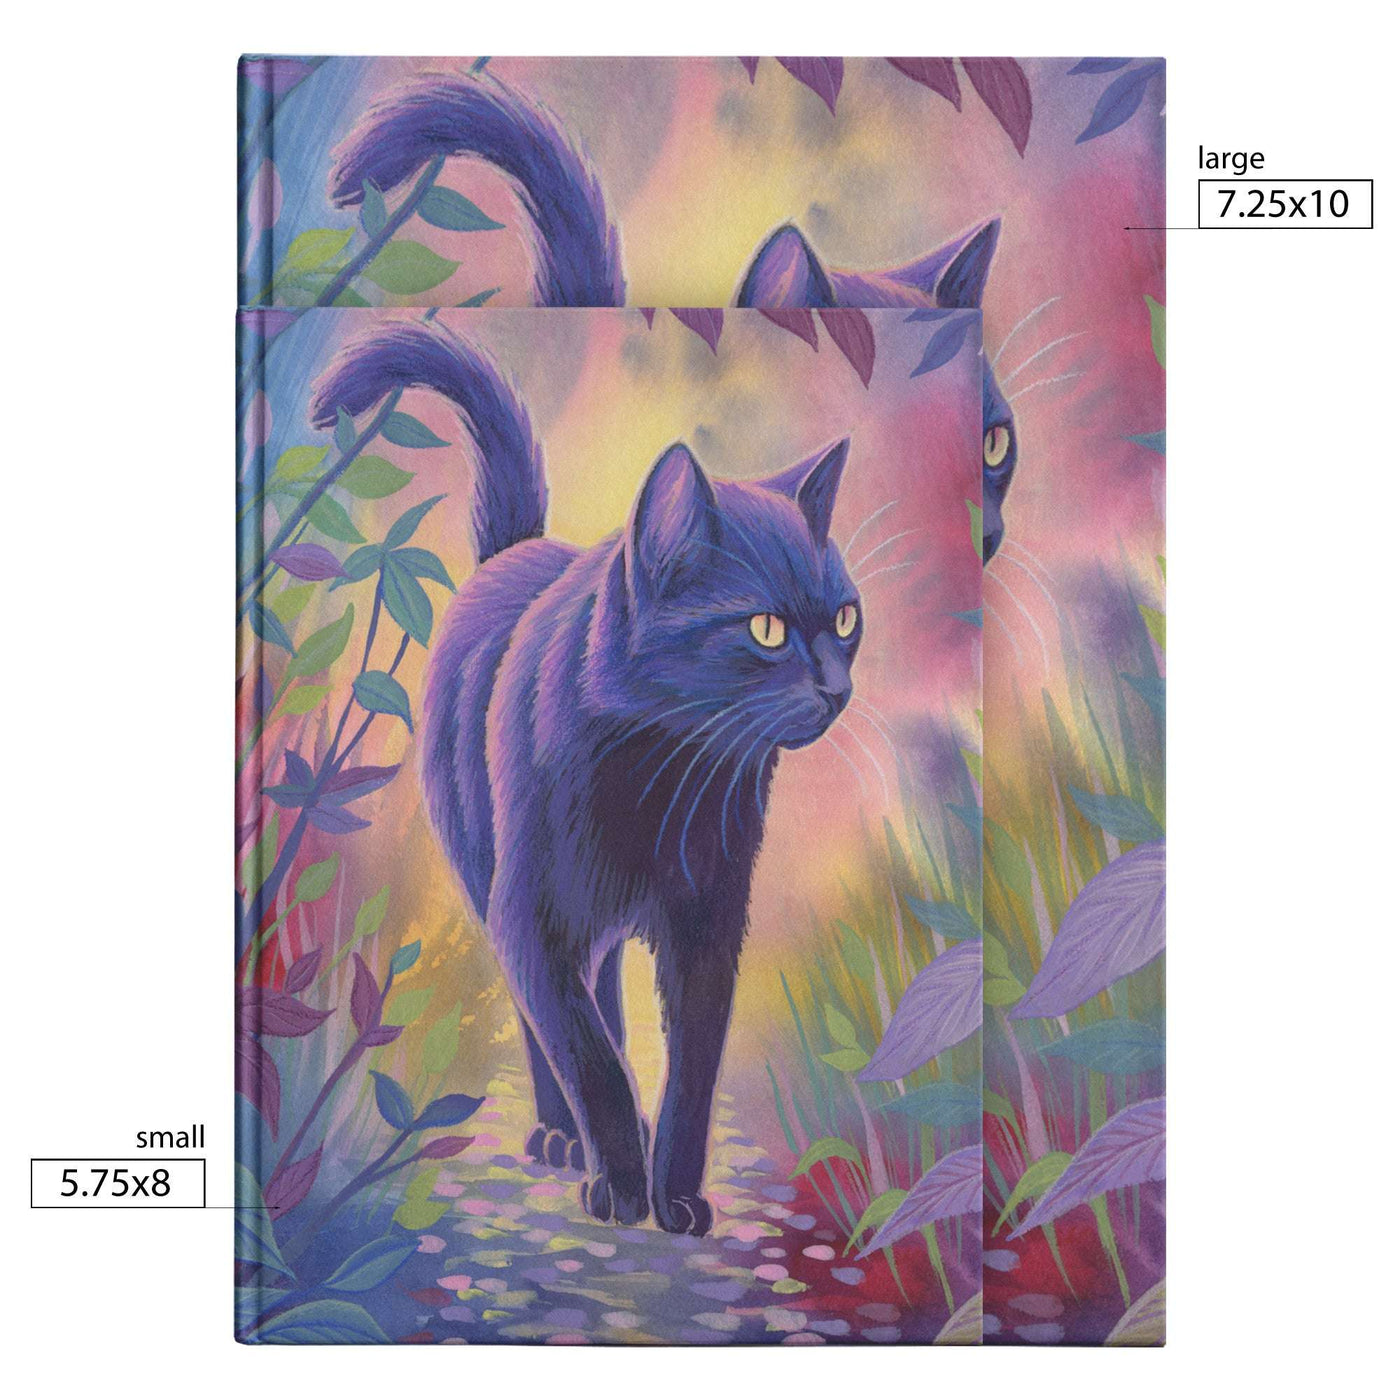 Two sizes of a Cat Journal, with a painting of a black cat walking through a colorful, abstract garden.